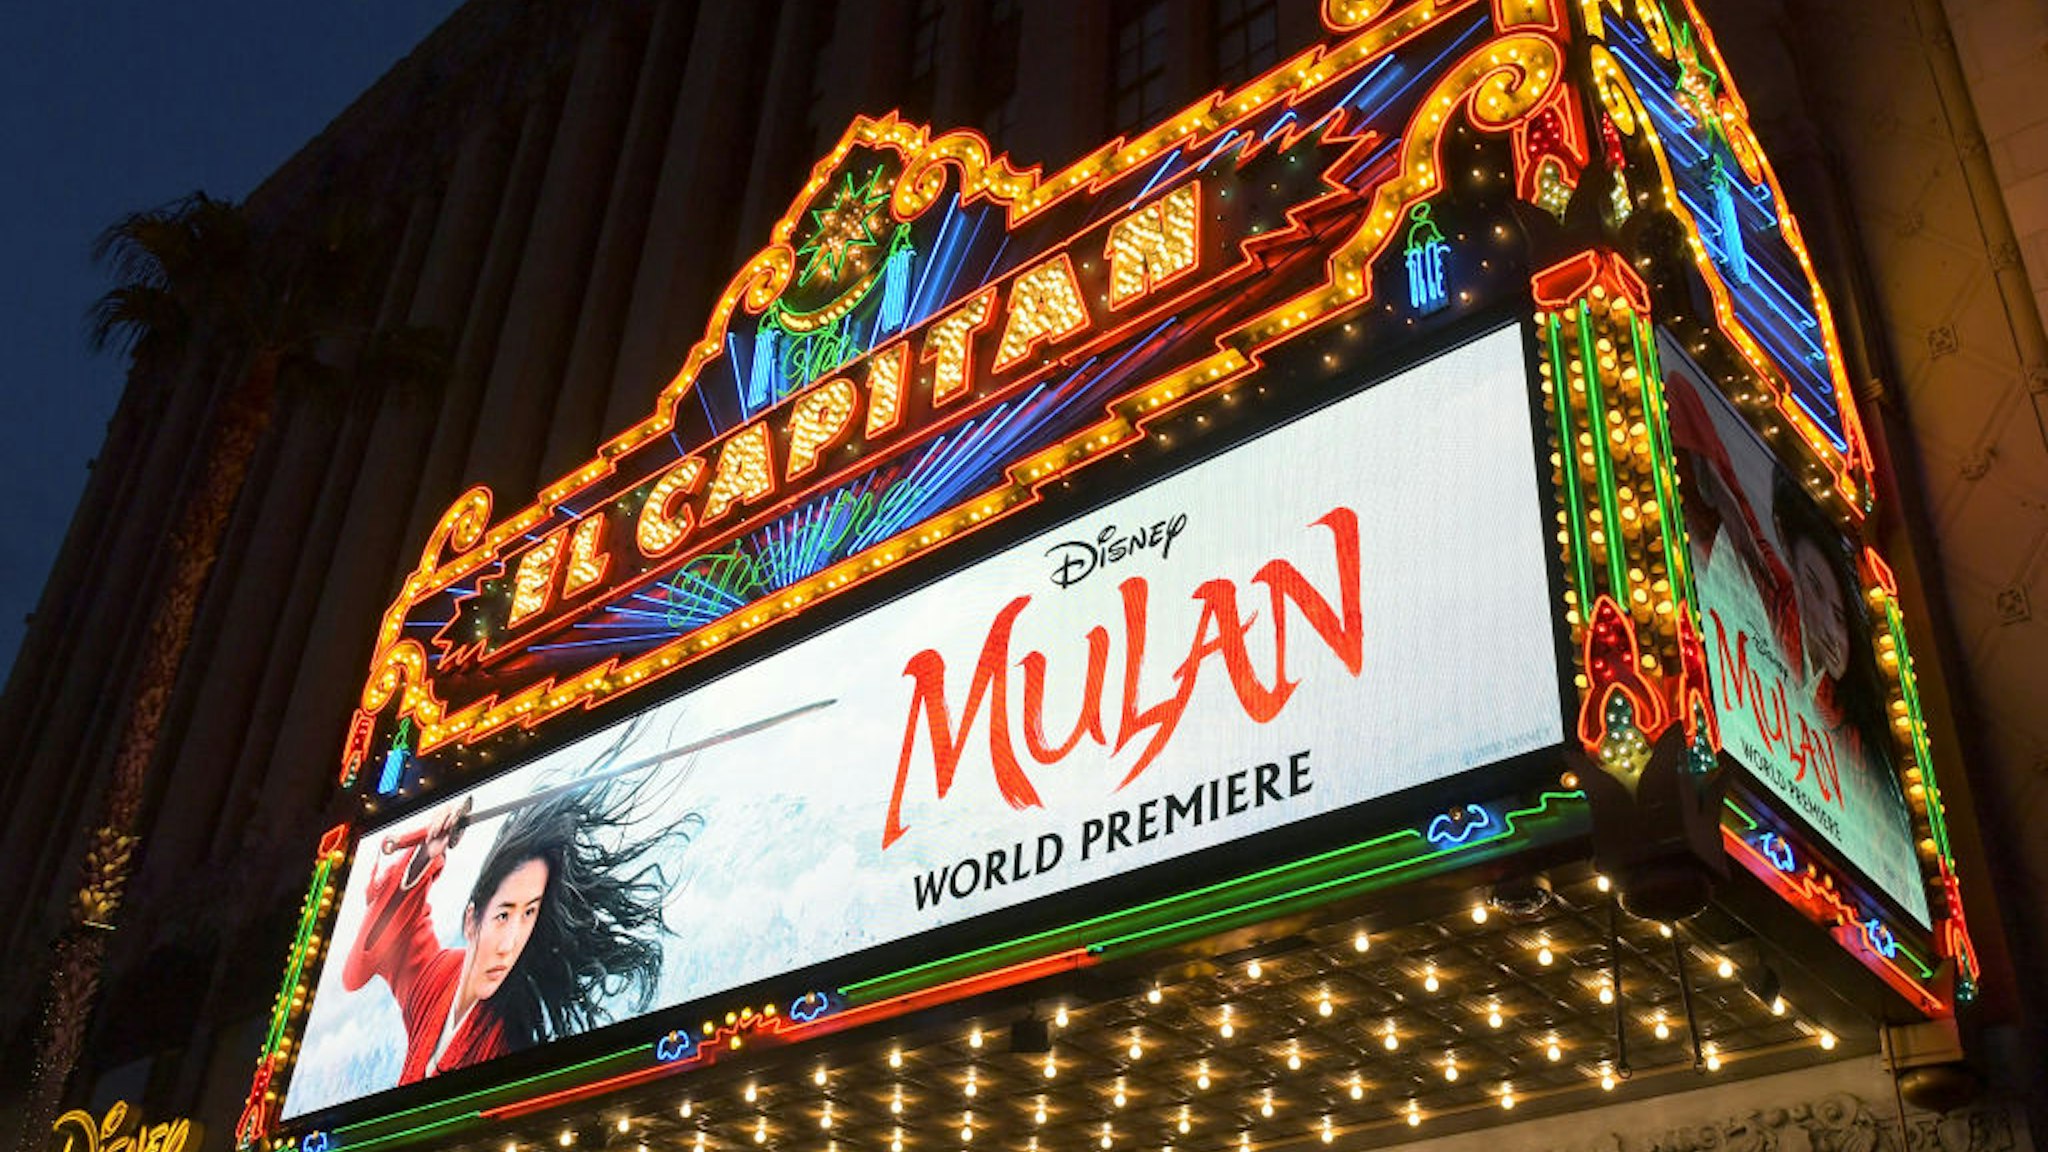 HOLLYWOOD, CALIFORNIA - MARCH 09: A view of the atmosphere at the World Premiere of Disney's 'MULAN' at the Dolby Theatre on March 09, 2020 in Hollywood, California. (Photo by Charley Gallay/Getty Images for Disney)